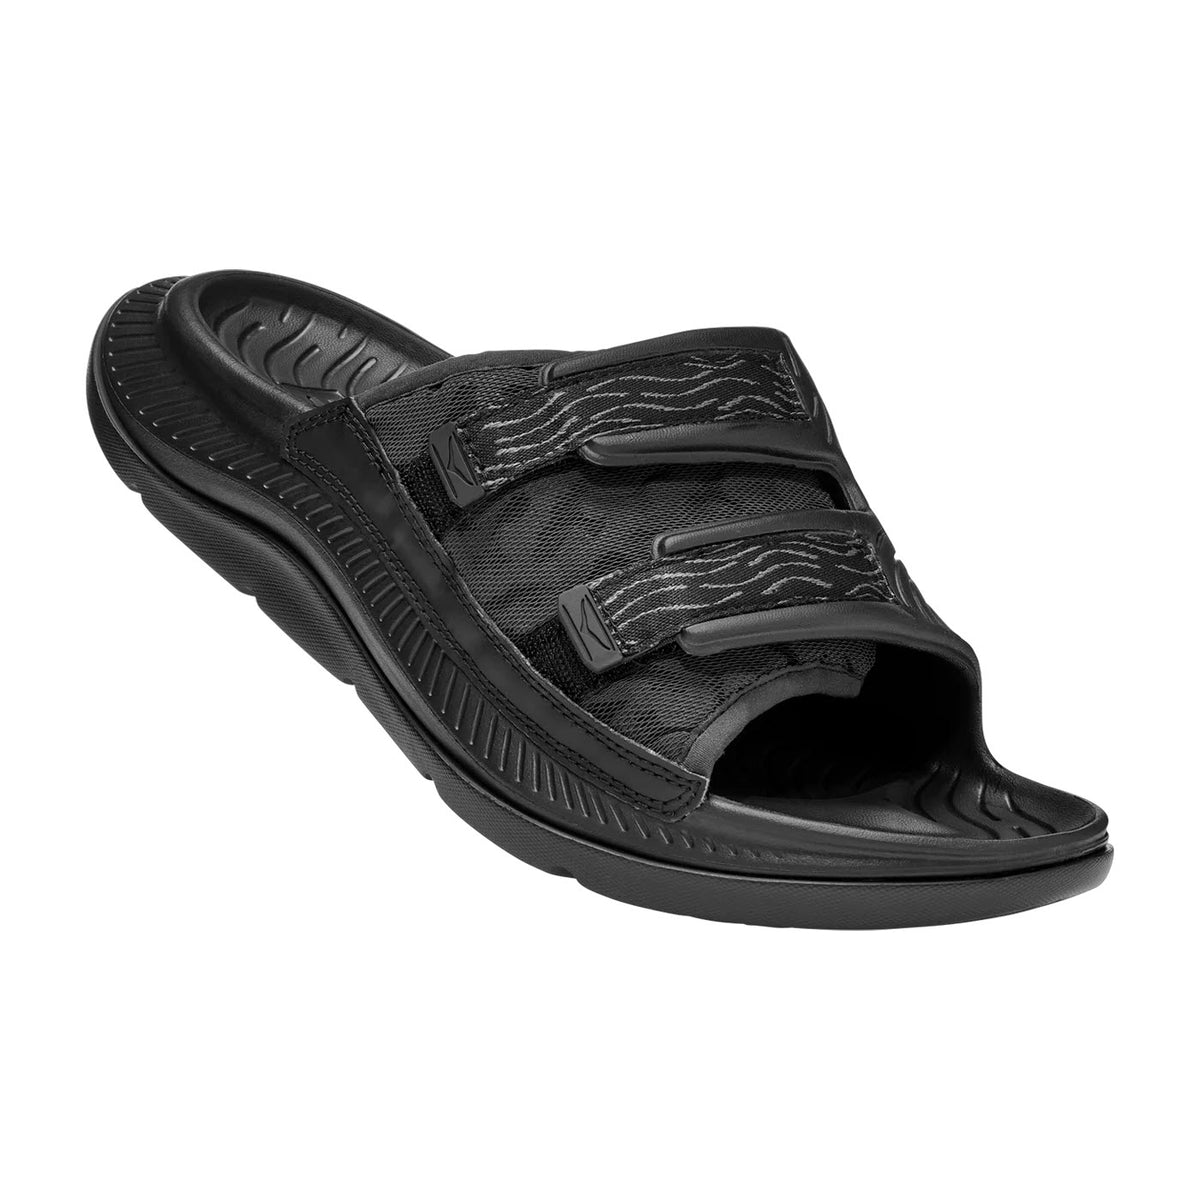 A single black ORA LUXE BLACK/BLACK - ADULT recovery slide with an adjustable Ariaprene® strap and a molded footbed, isolated on a white background by Hoka.